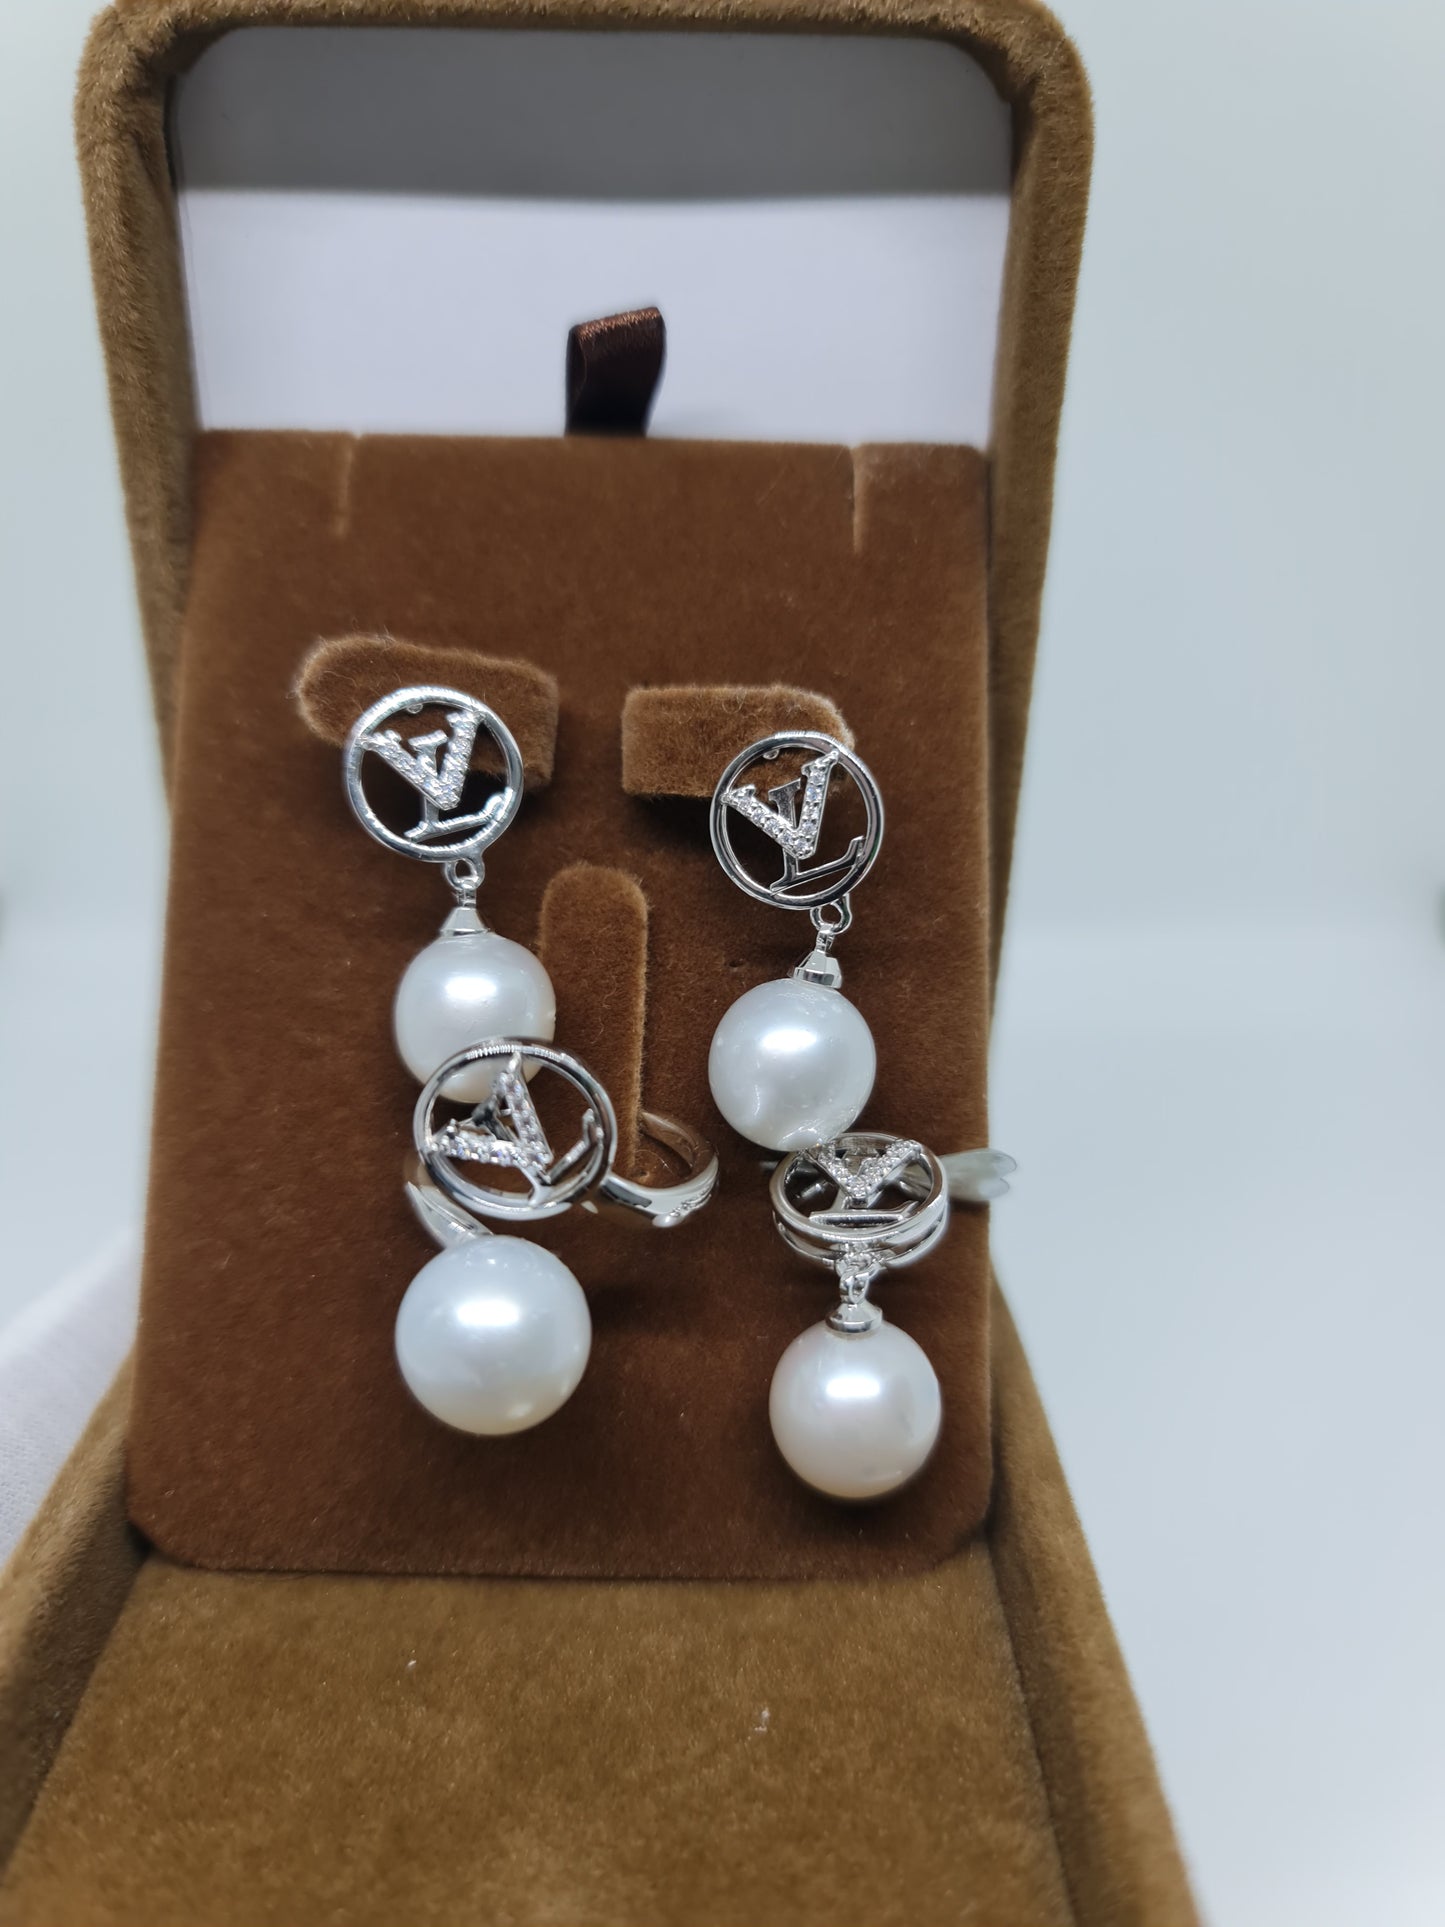 11.5mm to 12mm White South Sea Pearls Set in Plated Settings only